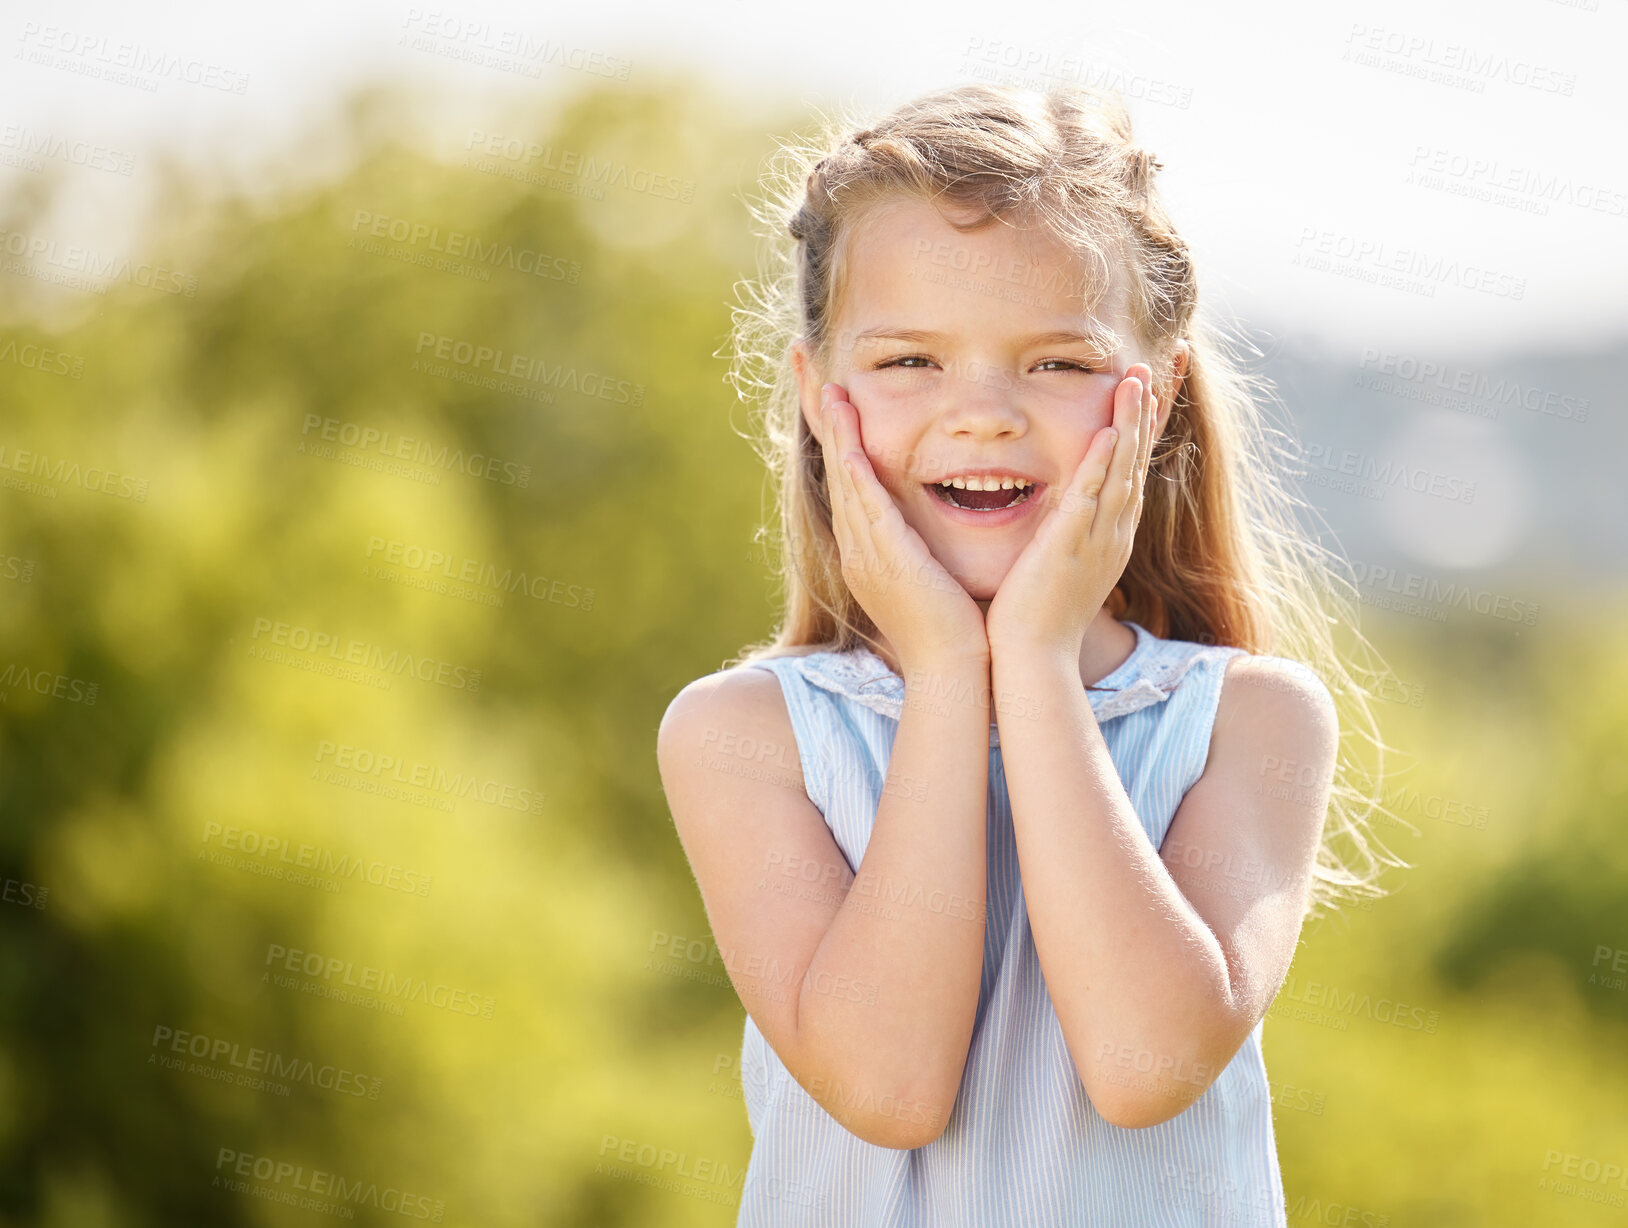 Buy stock photo Shot of a little girl looking surprised against in a park